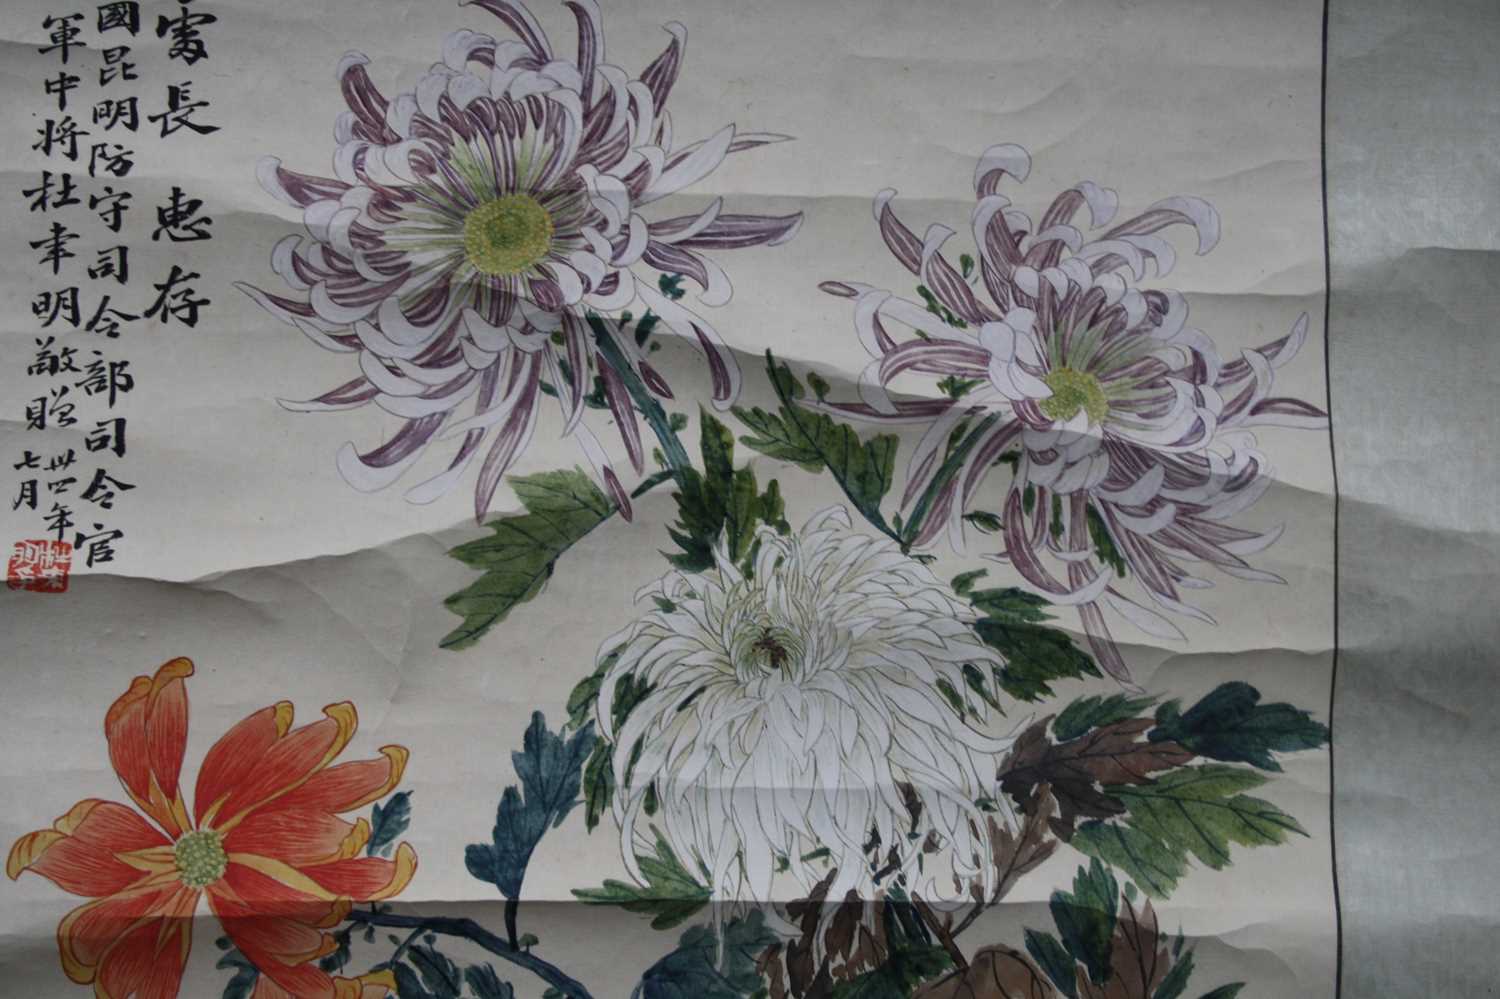 Yuan Yunyi (袁韻宜) (1920-2004) - Chrysanthemums, Republic of China scroll painting dated 1944, ink - Image 7 of 31